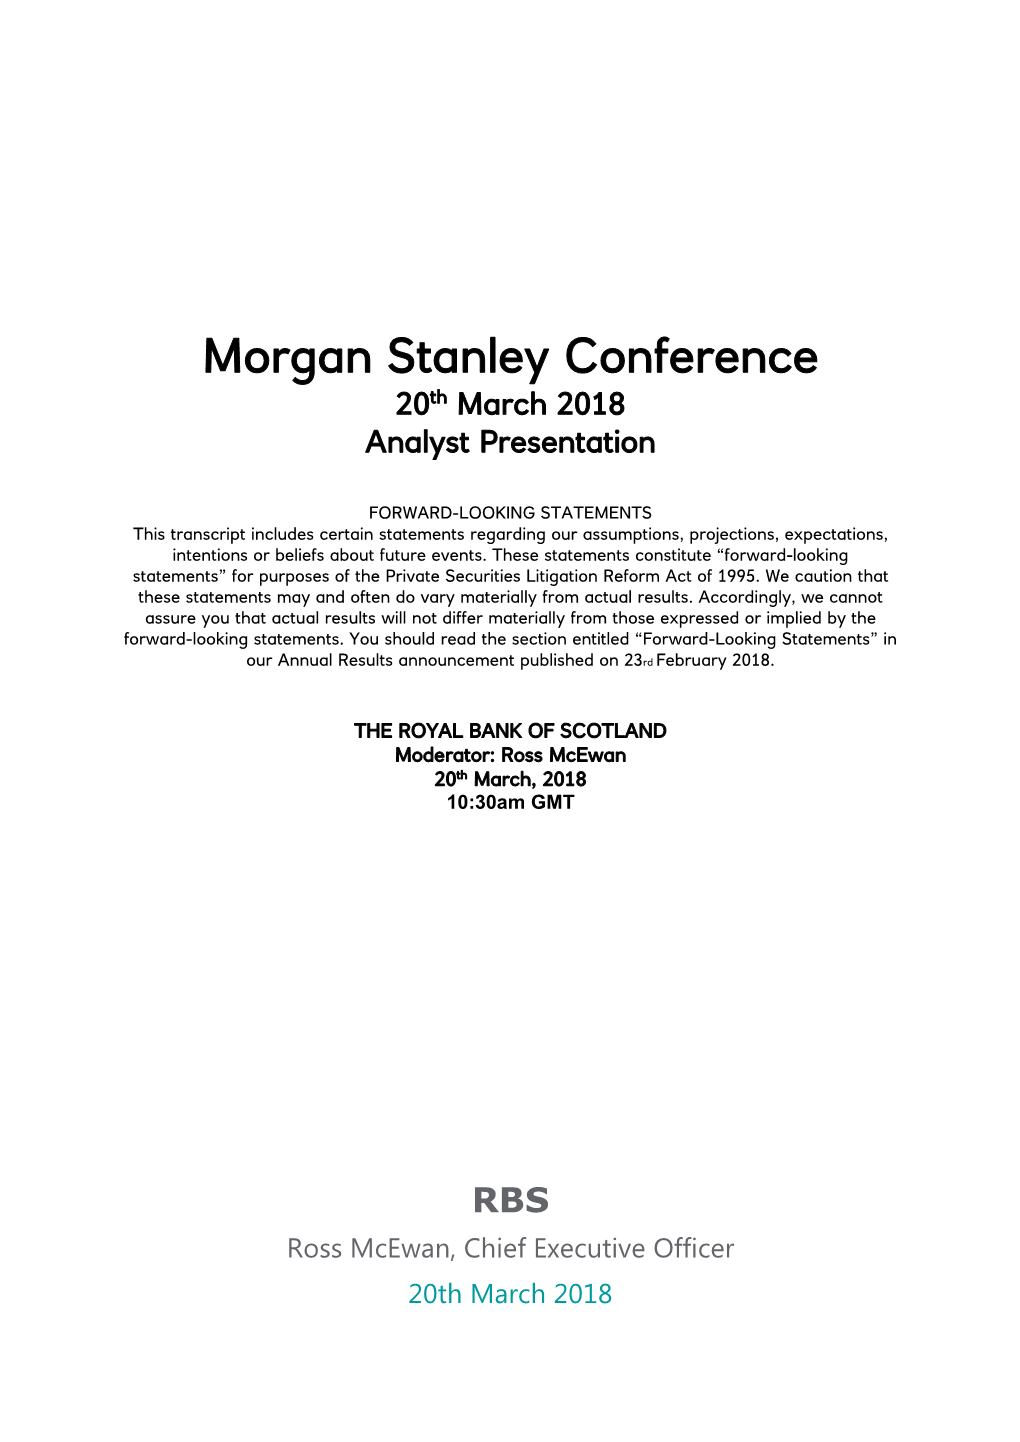 Morgan Stanley Conference 20Th March 2018 Analyst Presentation